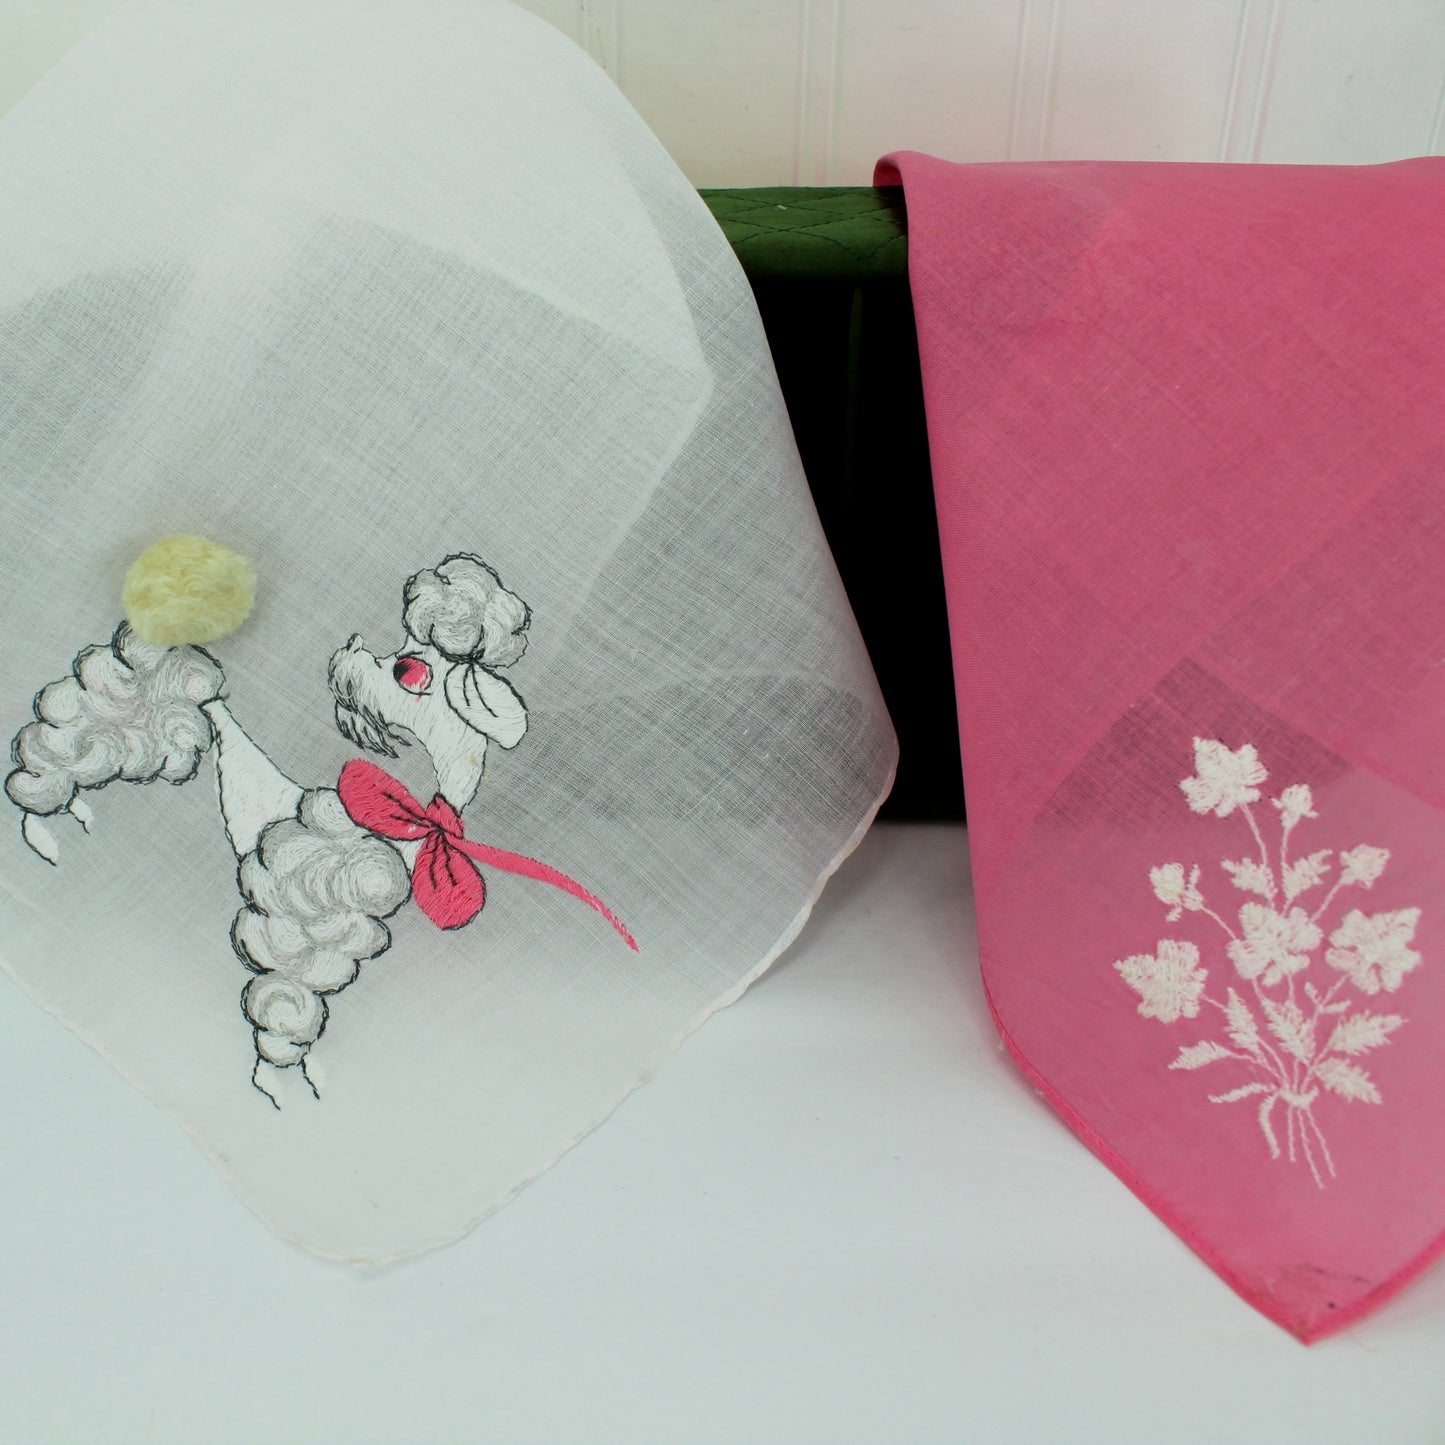 Collection 2 Handkerchiefs 1950s Poodle Pom Pom Tail Rolled Hem Coordinating Pink closeup of design both handkerchiefs